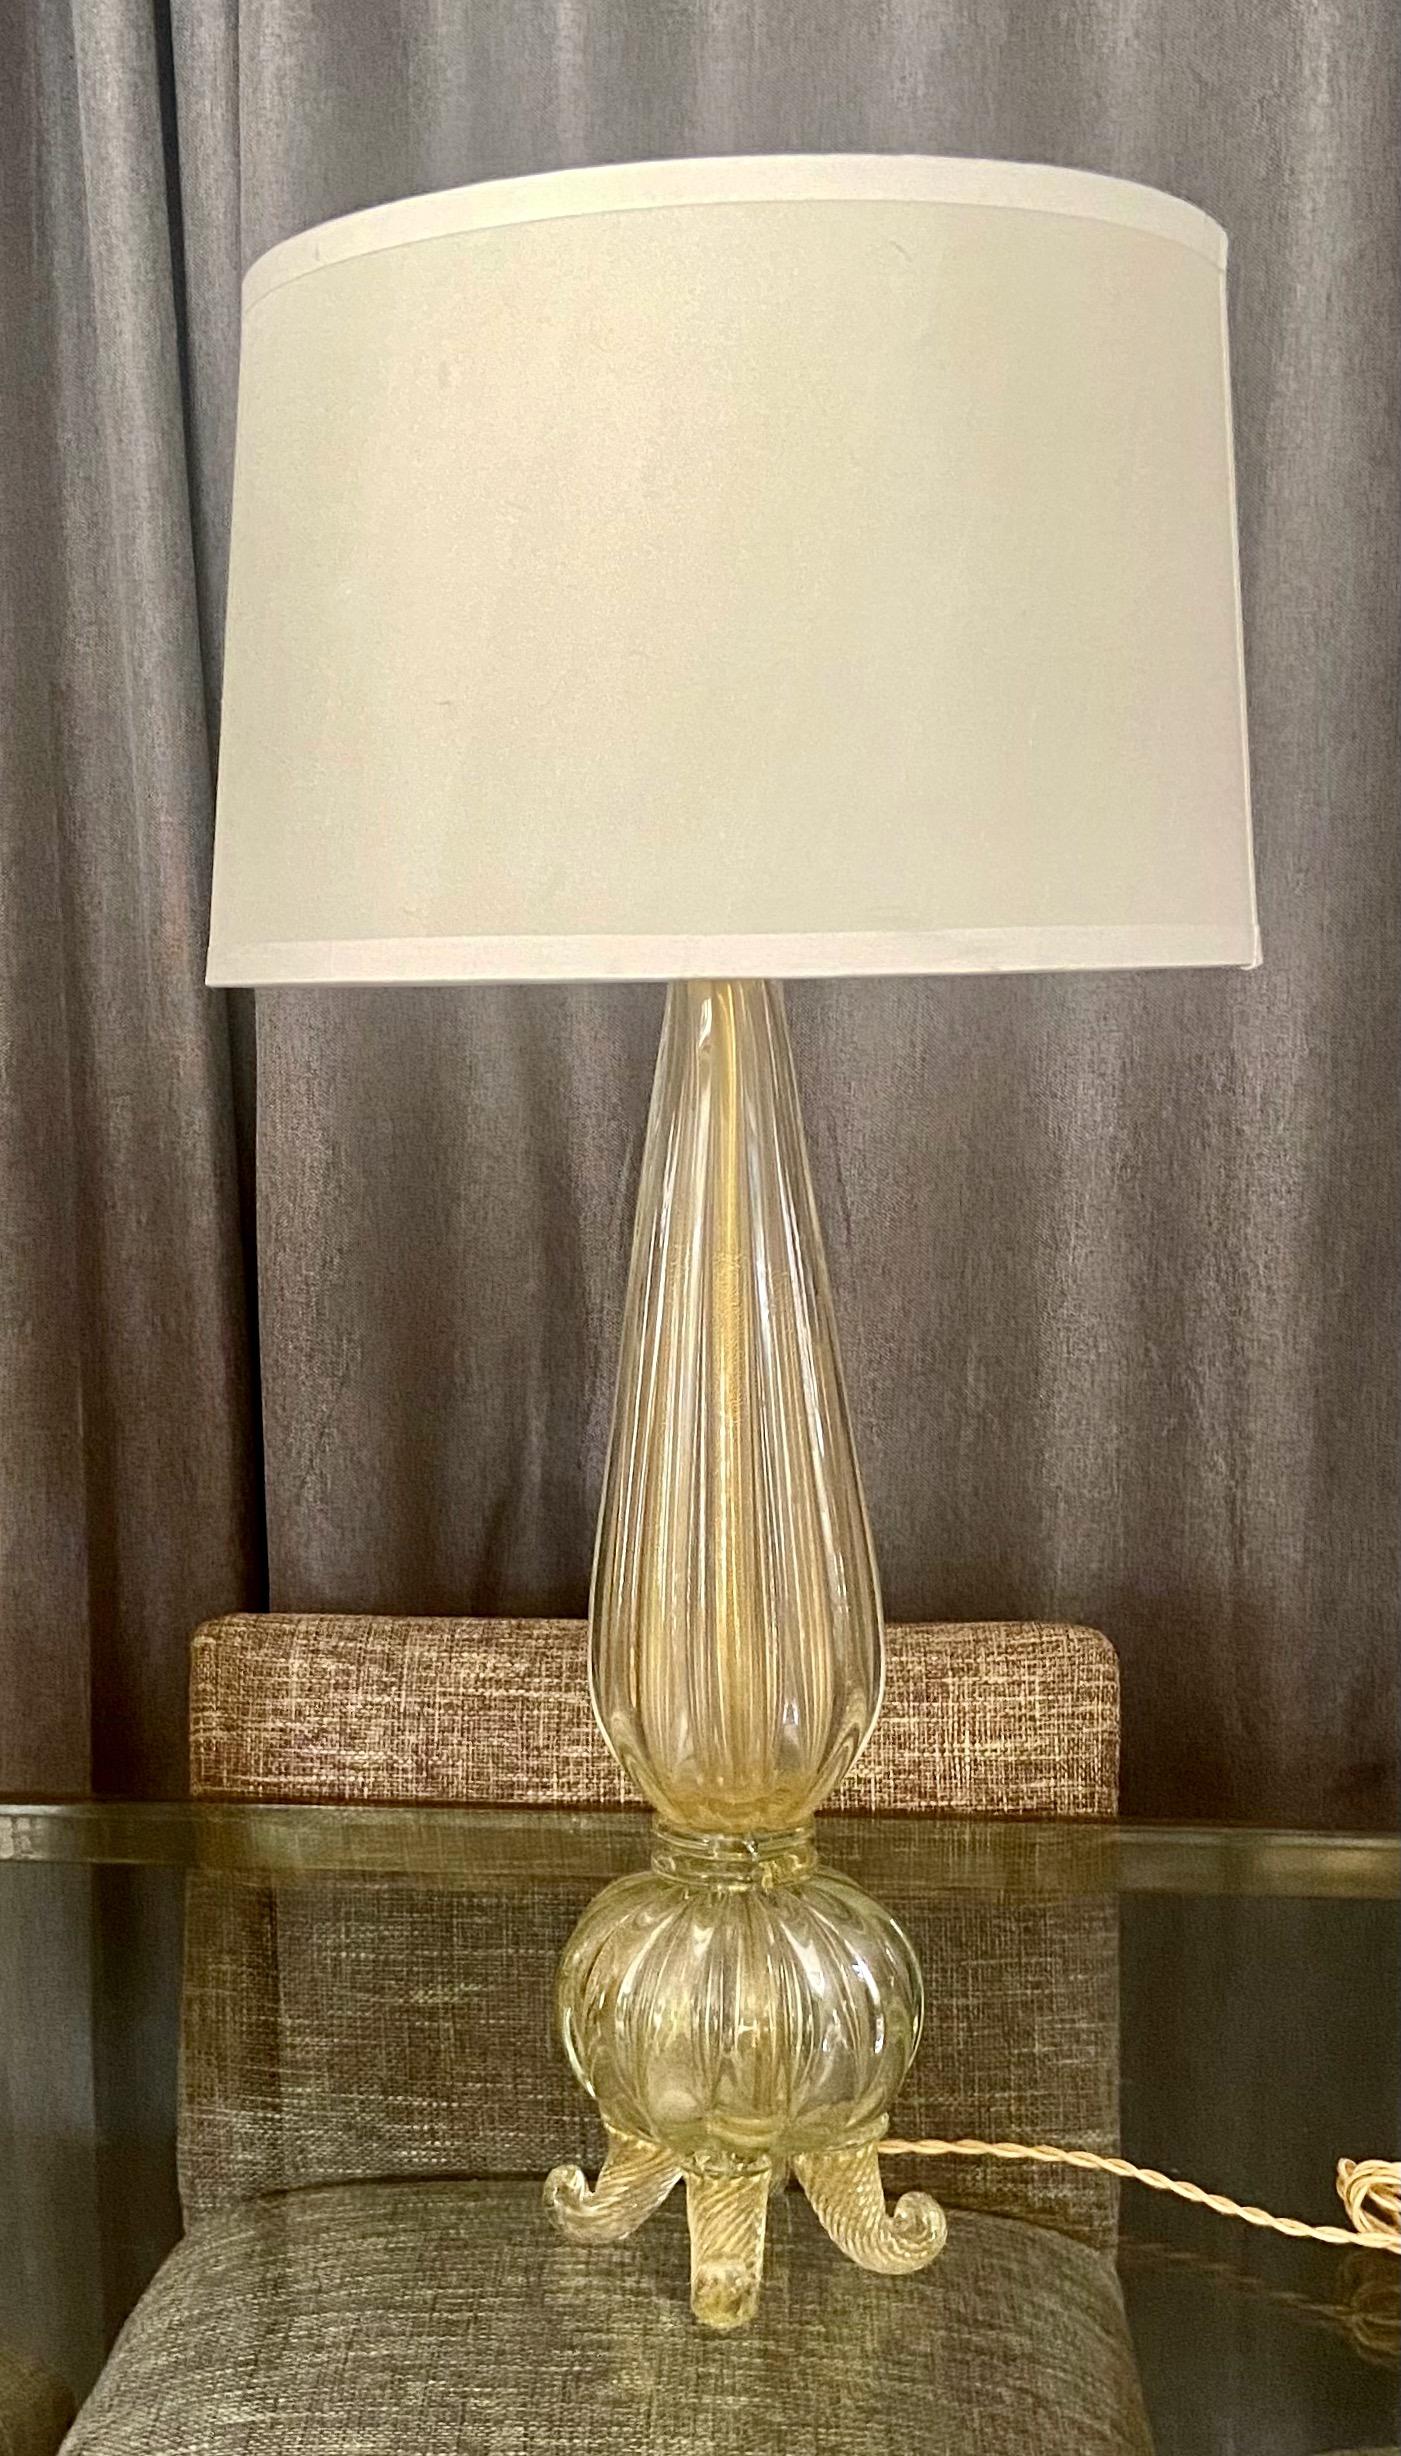 Handblown Murano Italian footed glass table lamp with lots of gold inclusions, by Barovier & Toso. Rewired with new full range socket and French style rayon covered cord. This stylist lamp goes perfect in most modern or traditional decor. Shade not